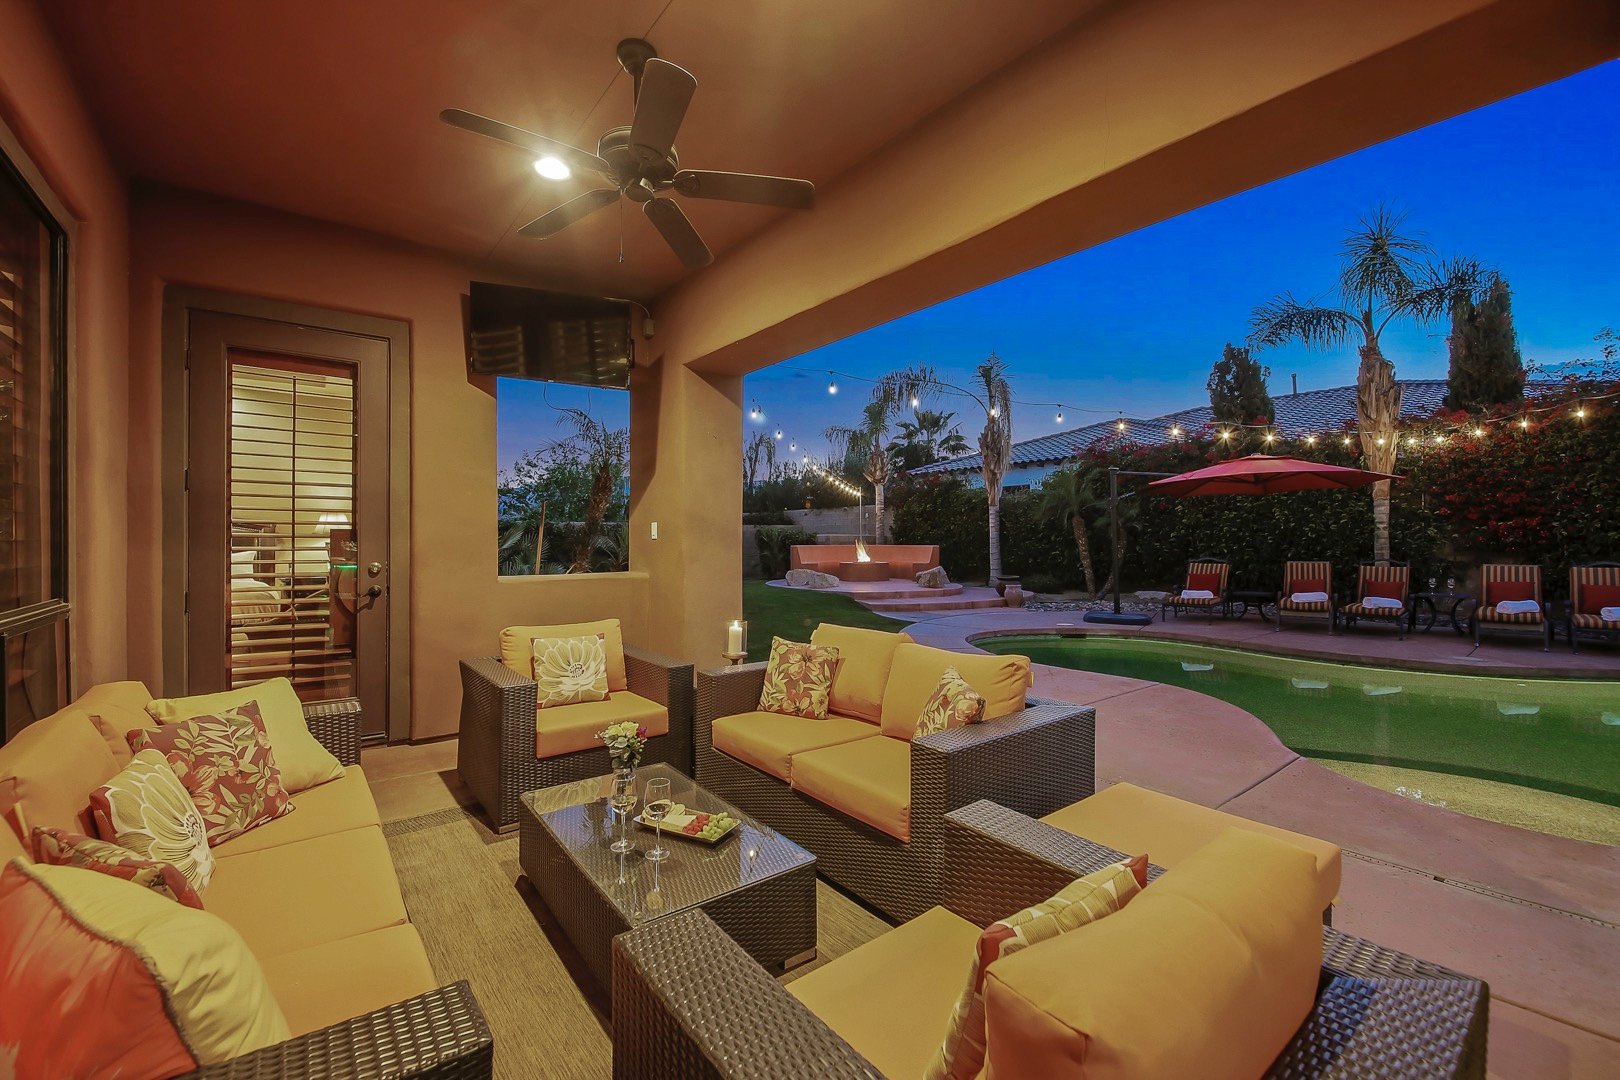 Covered outdoor living area with TV and seating for seven.